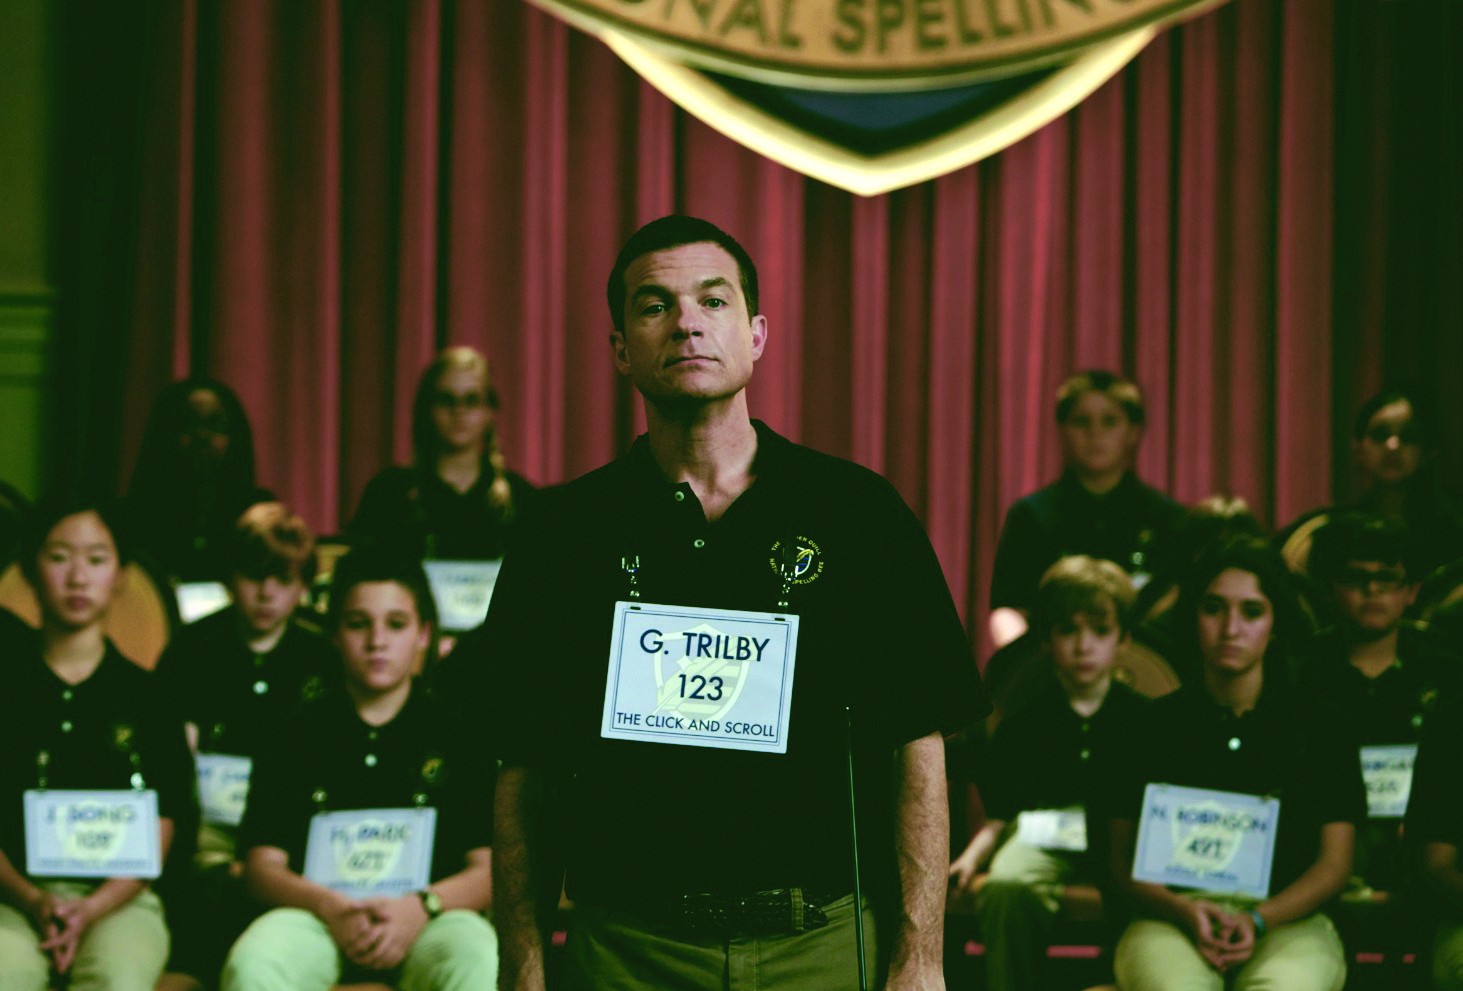 Jason Bateman stars as Guy Trilby in Focus Features' Bad Words (2014)